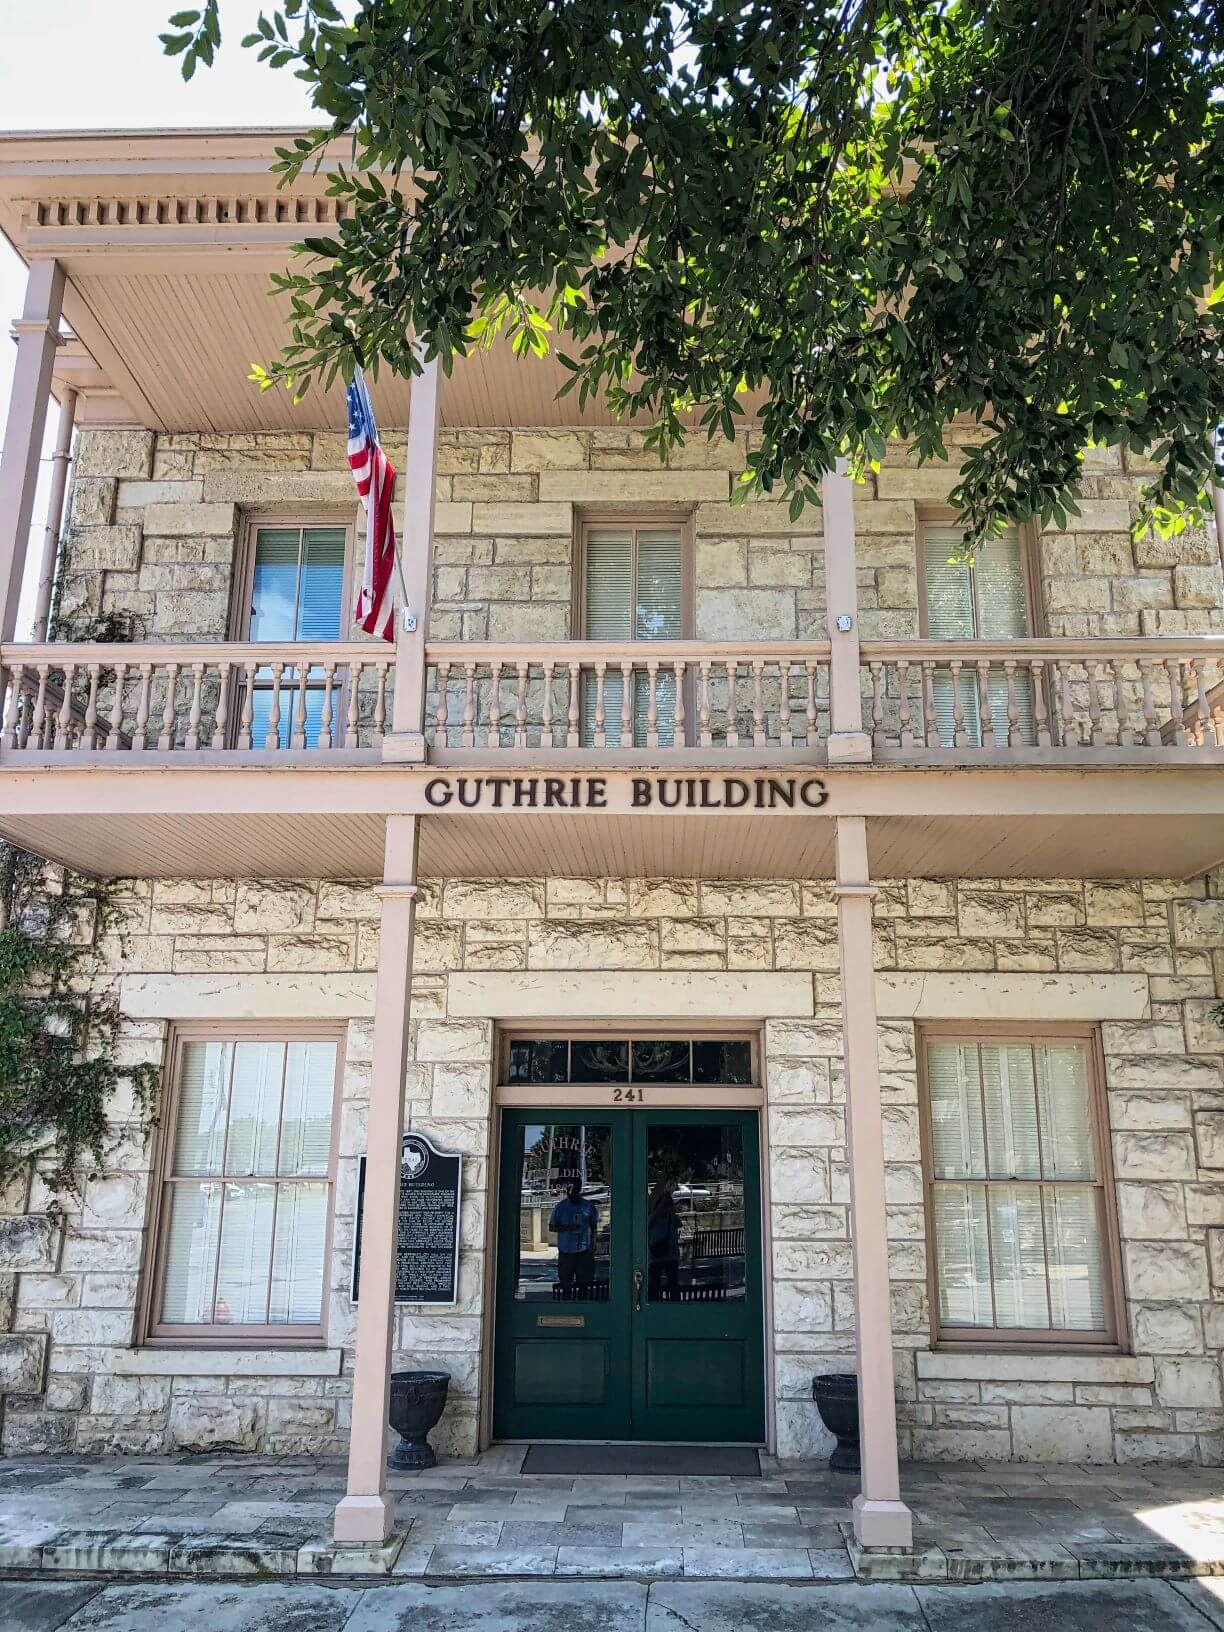 The Guthrie Building in dowtown Kerrville, Texas